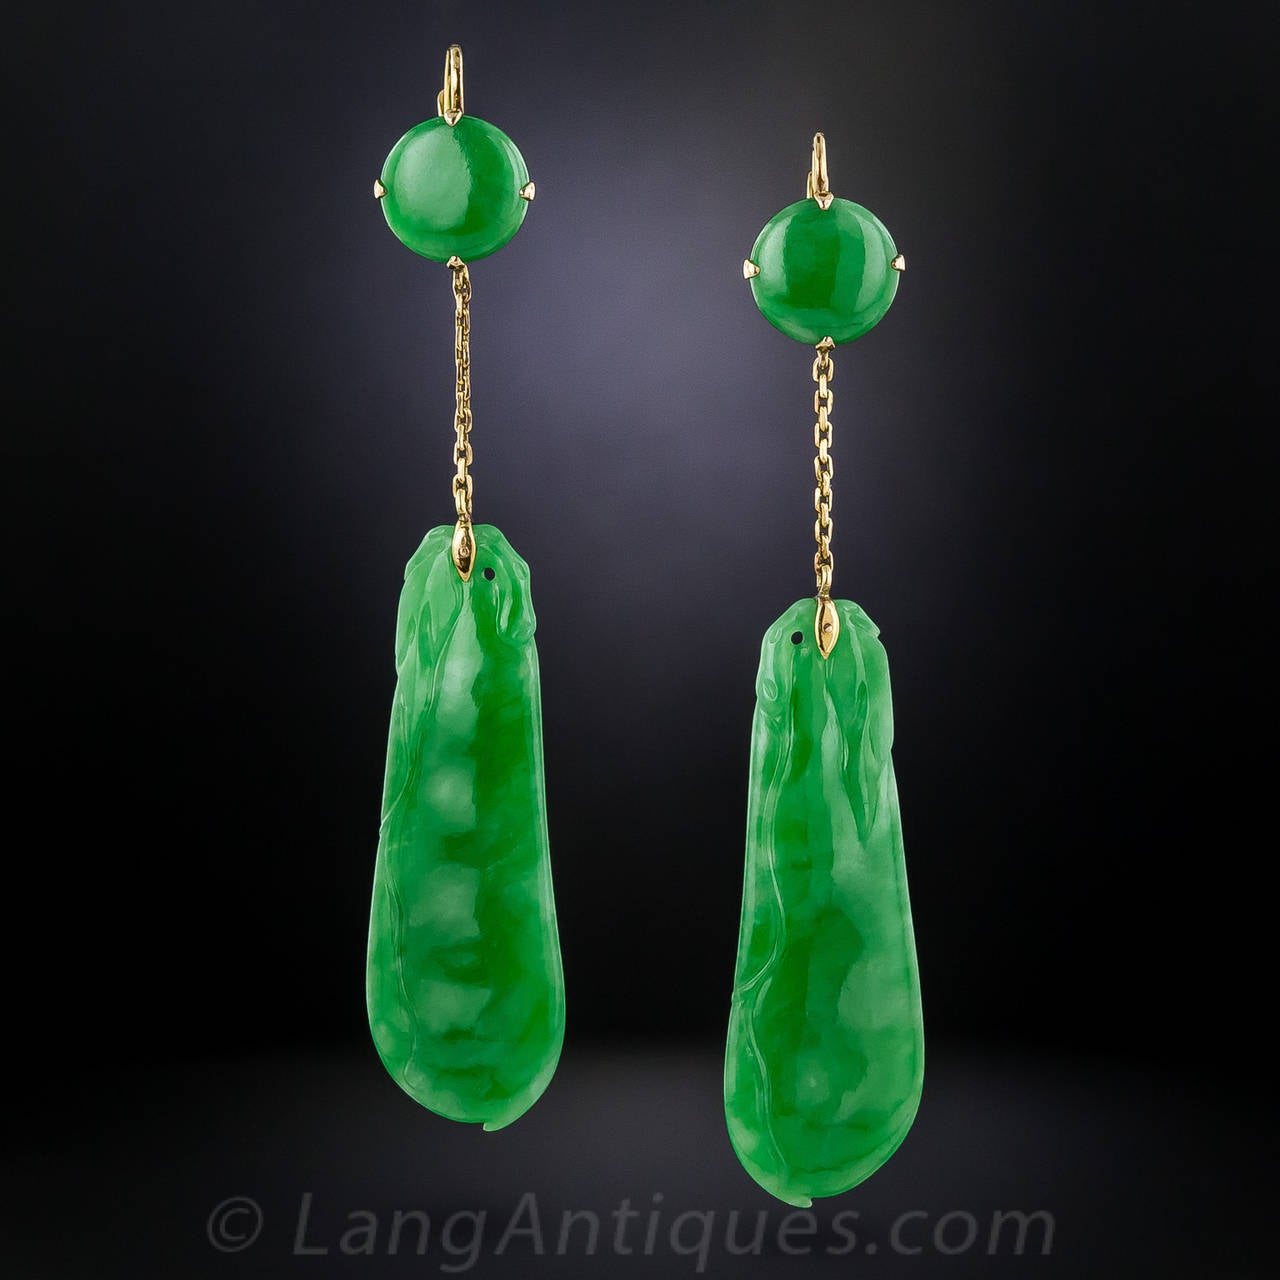 We've encountered few, if any, carved jade earrings to rival this fabulous pair, comprised of four luscious, bright green, natural jades: one pair of 1 and 1/8 inch long carvings surmounted by another pair of round buttons, connected by a gold